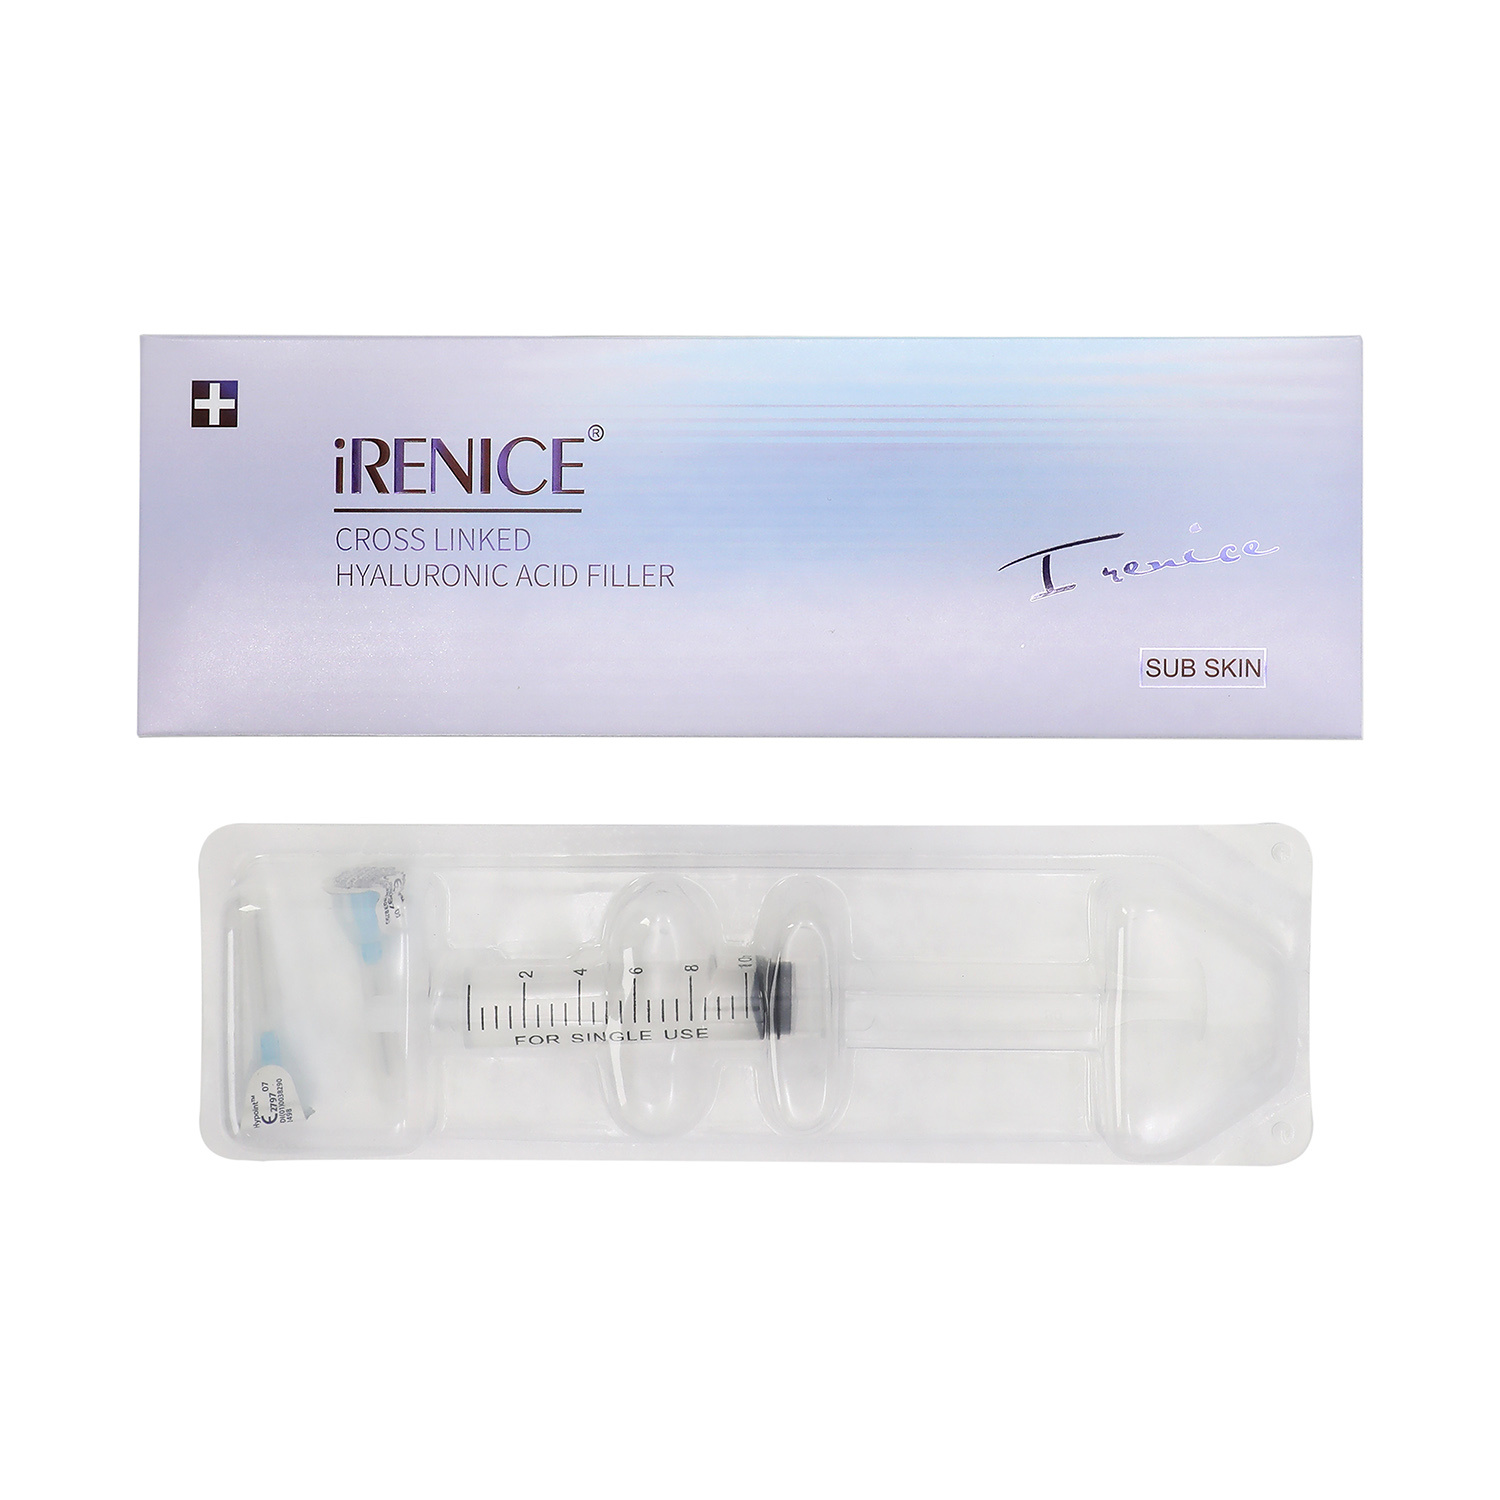 iRenice 24mg Subskin pure hyaluronic acid dermal filler for butt breast enlargement increase buttock size